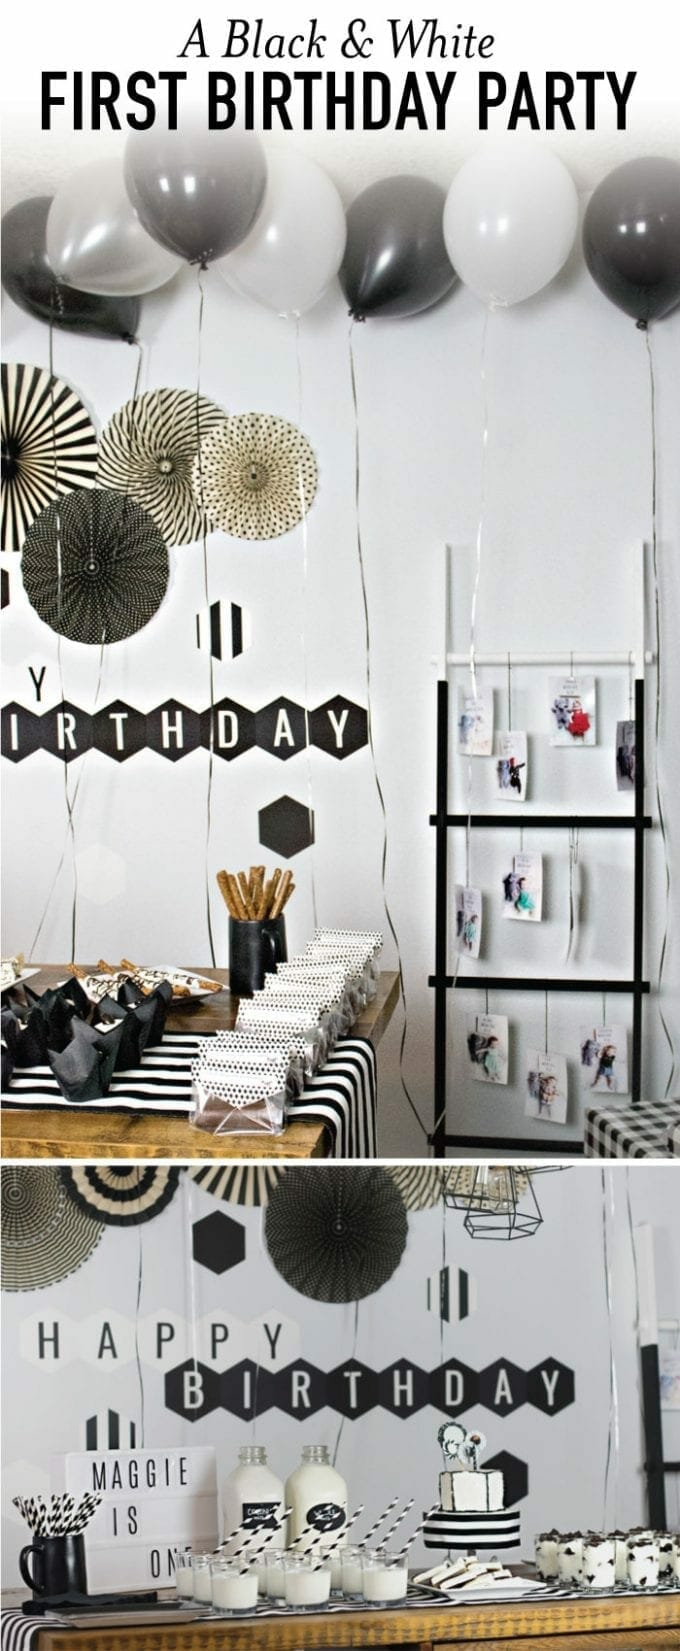 A black and white birthday party